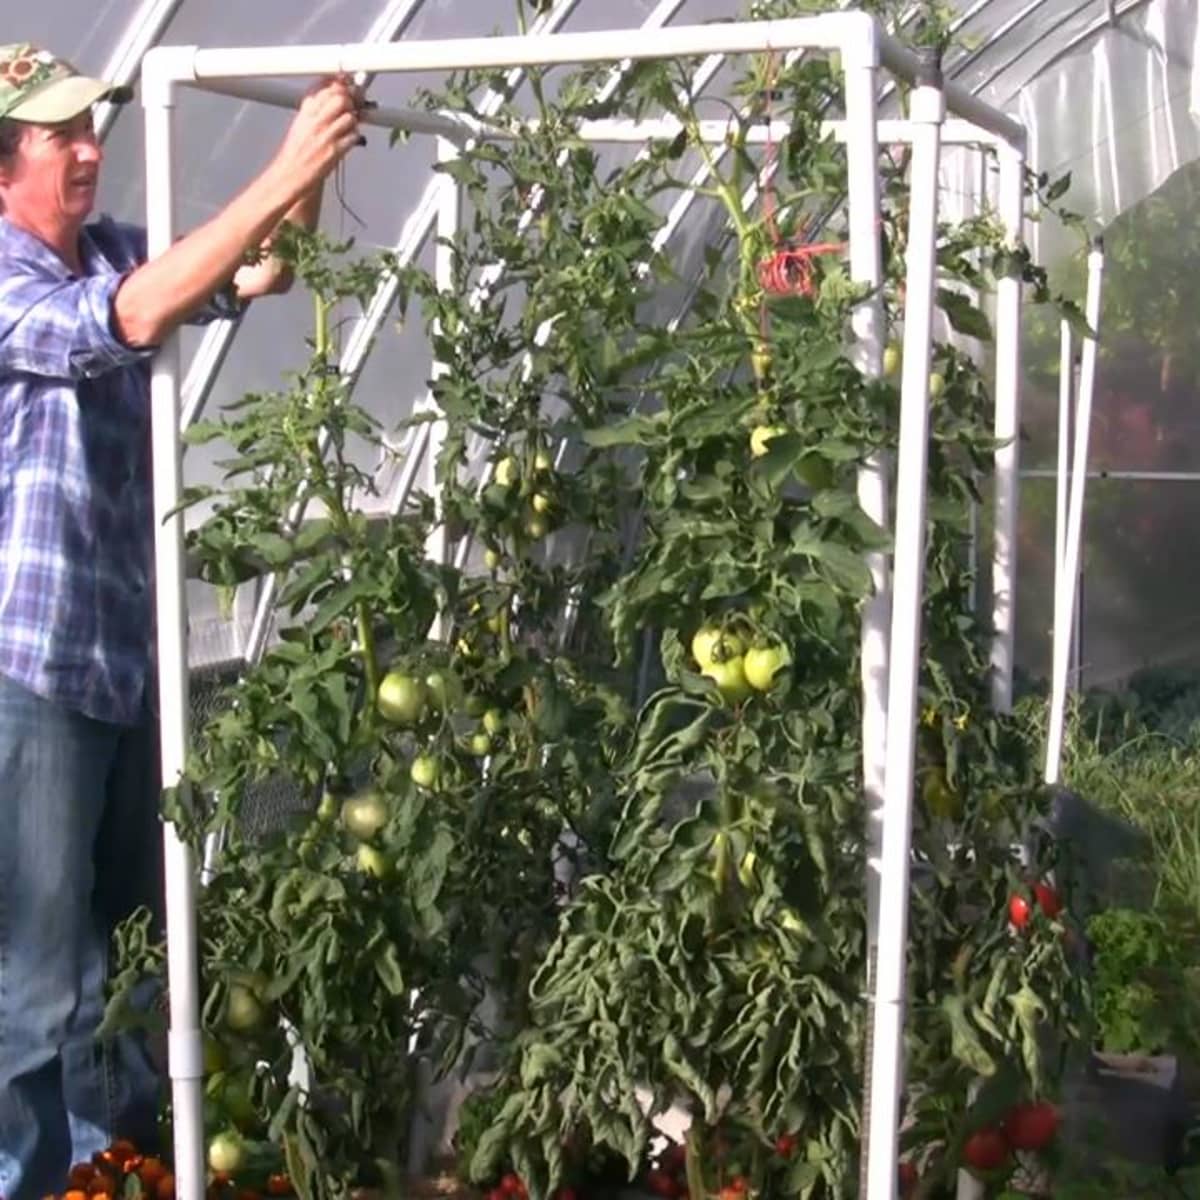 How to Install a Lean-and-Lower Trellis System for Tomatoes